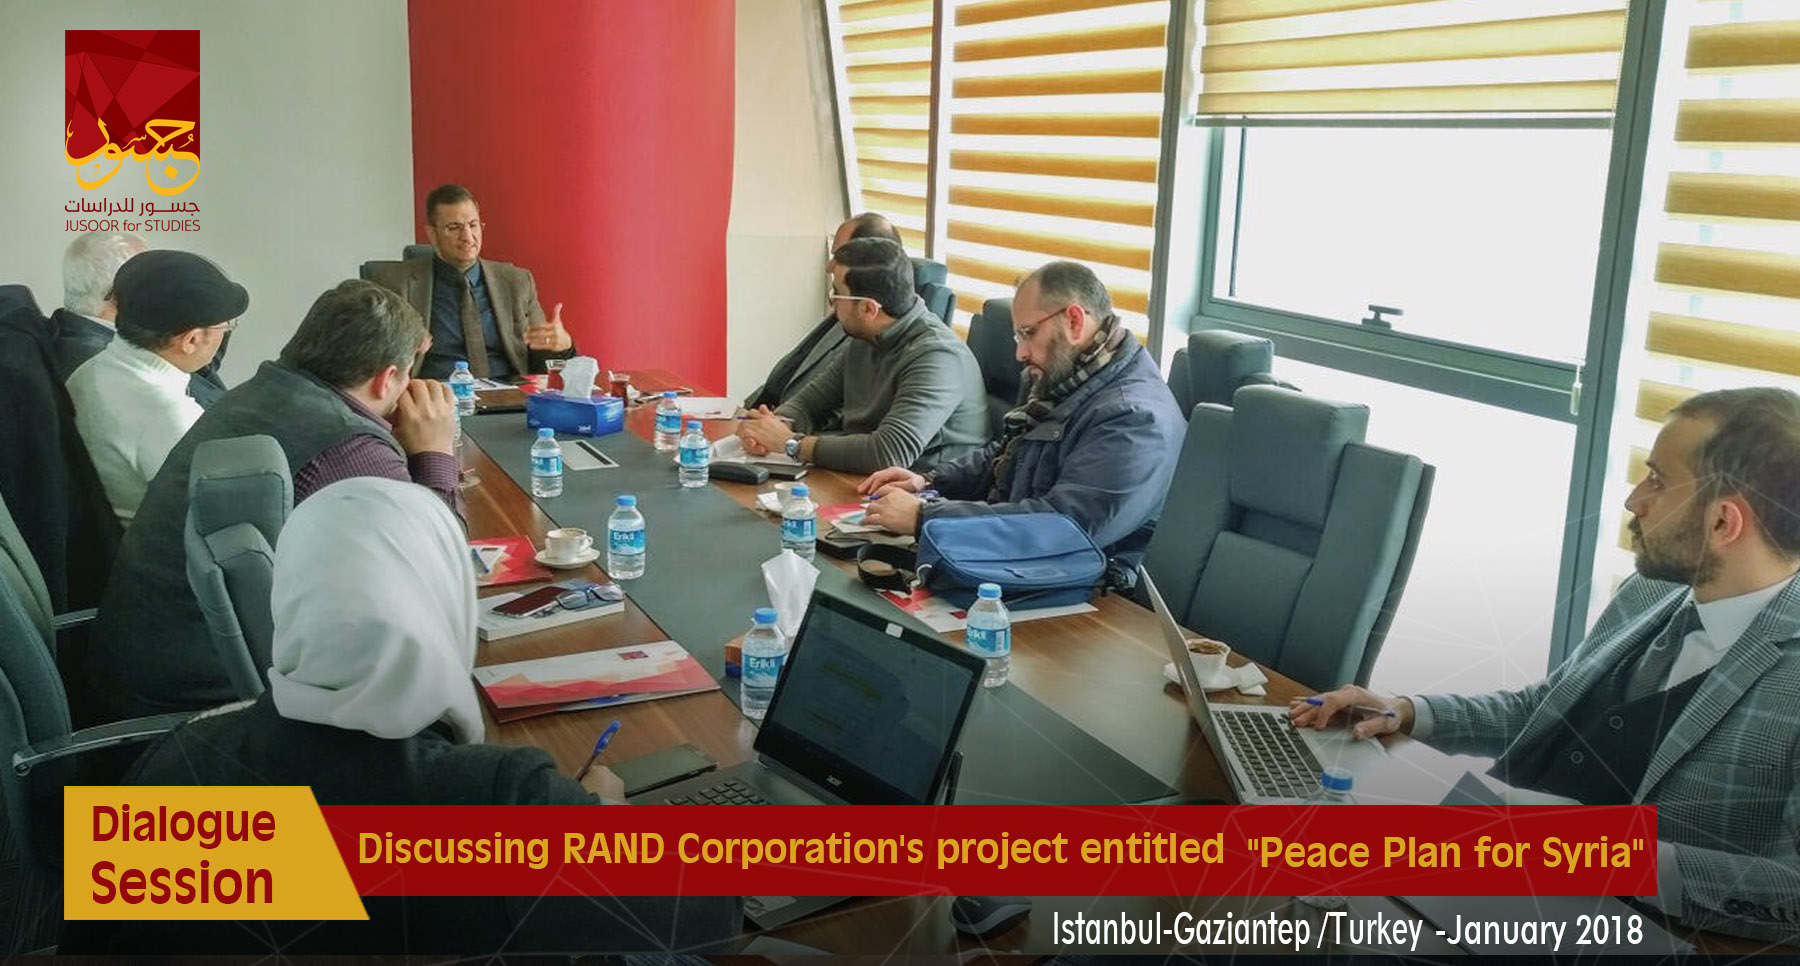 Dialogue Session by Jusoor for Studies Center about RAND Corporation's project in Syria